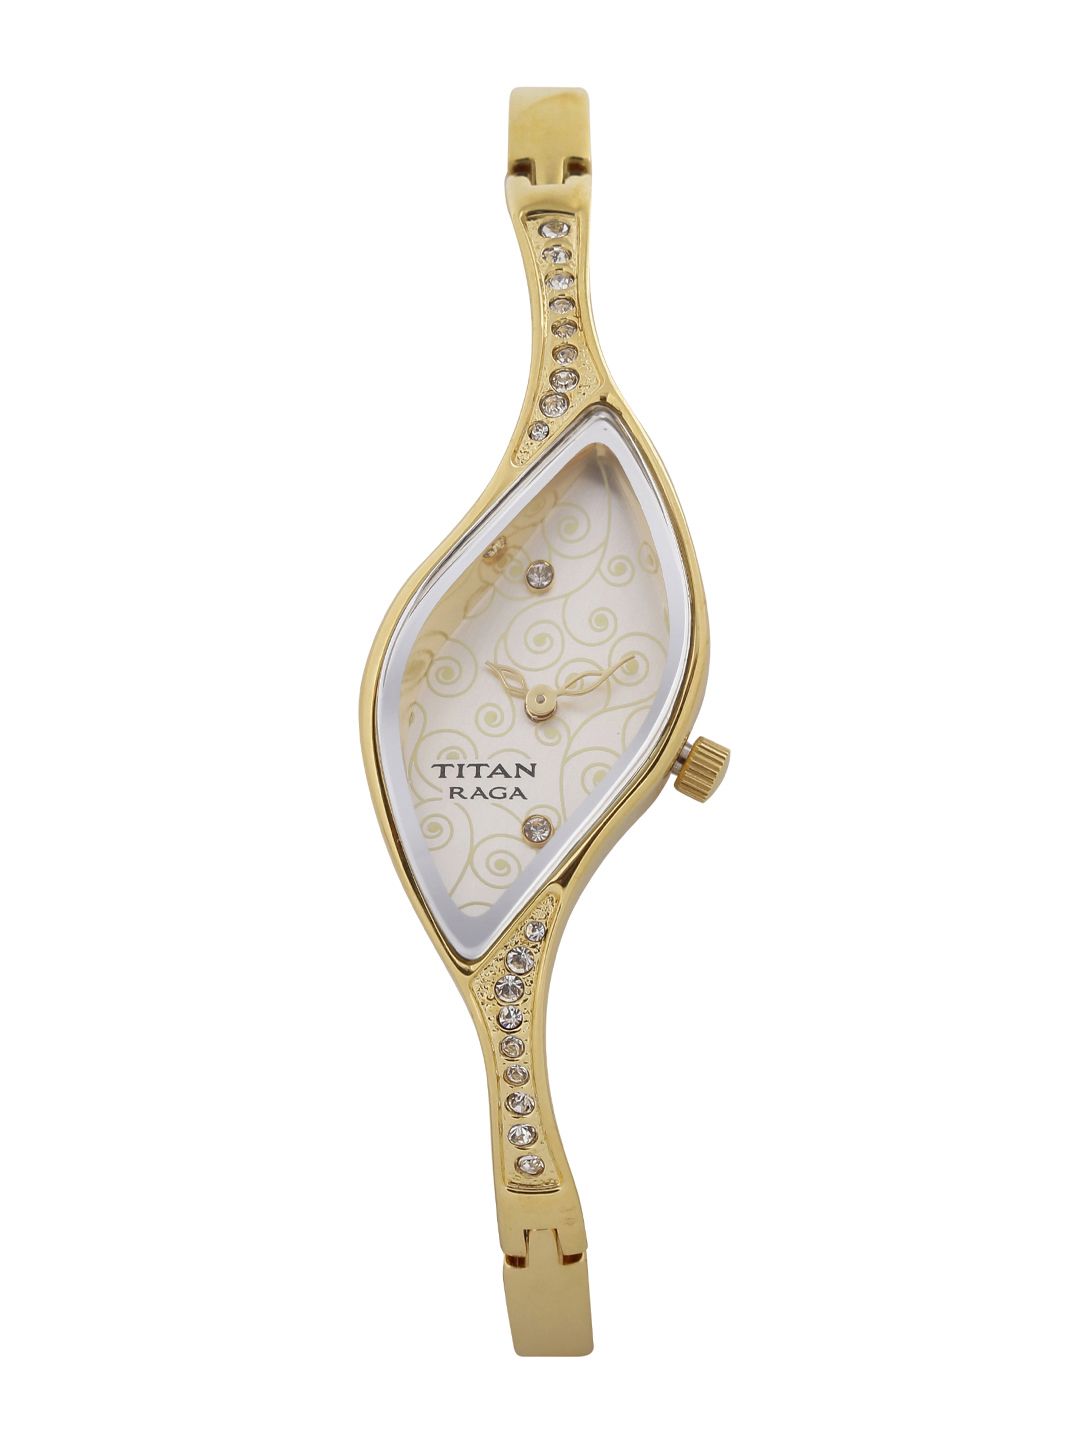 Titan Raga Crystals Women Gold-Toned Dial Watch NF9710YM01E Price in India